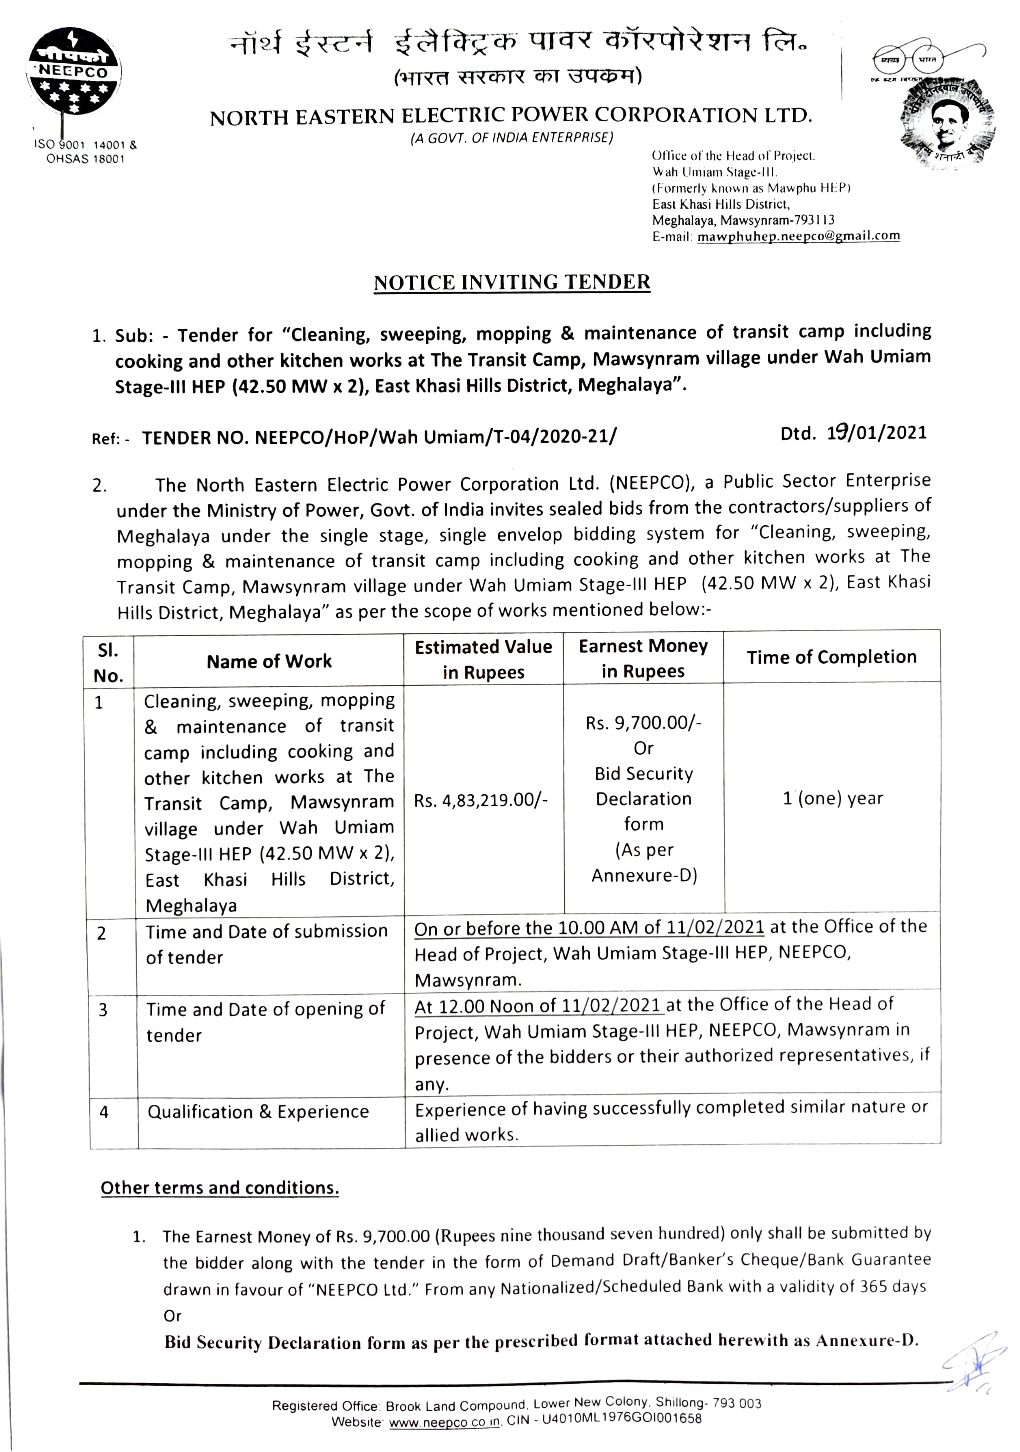 Time and Date of Submission on Or Before the 10.00 AM of 11/02/2021 at the Office of the of Tender Head of Project, Wah Umiam Stage-I HEP, Neepco, Mawsynram